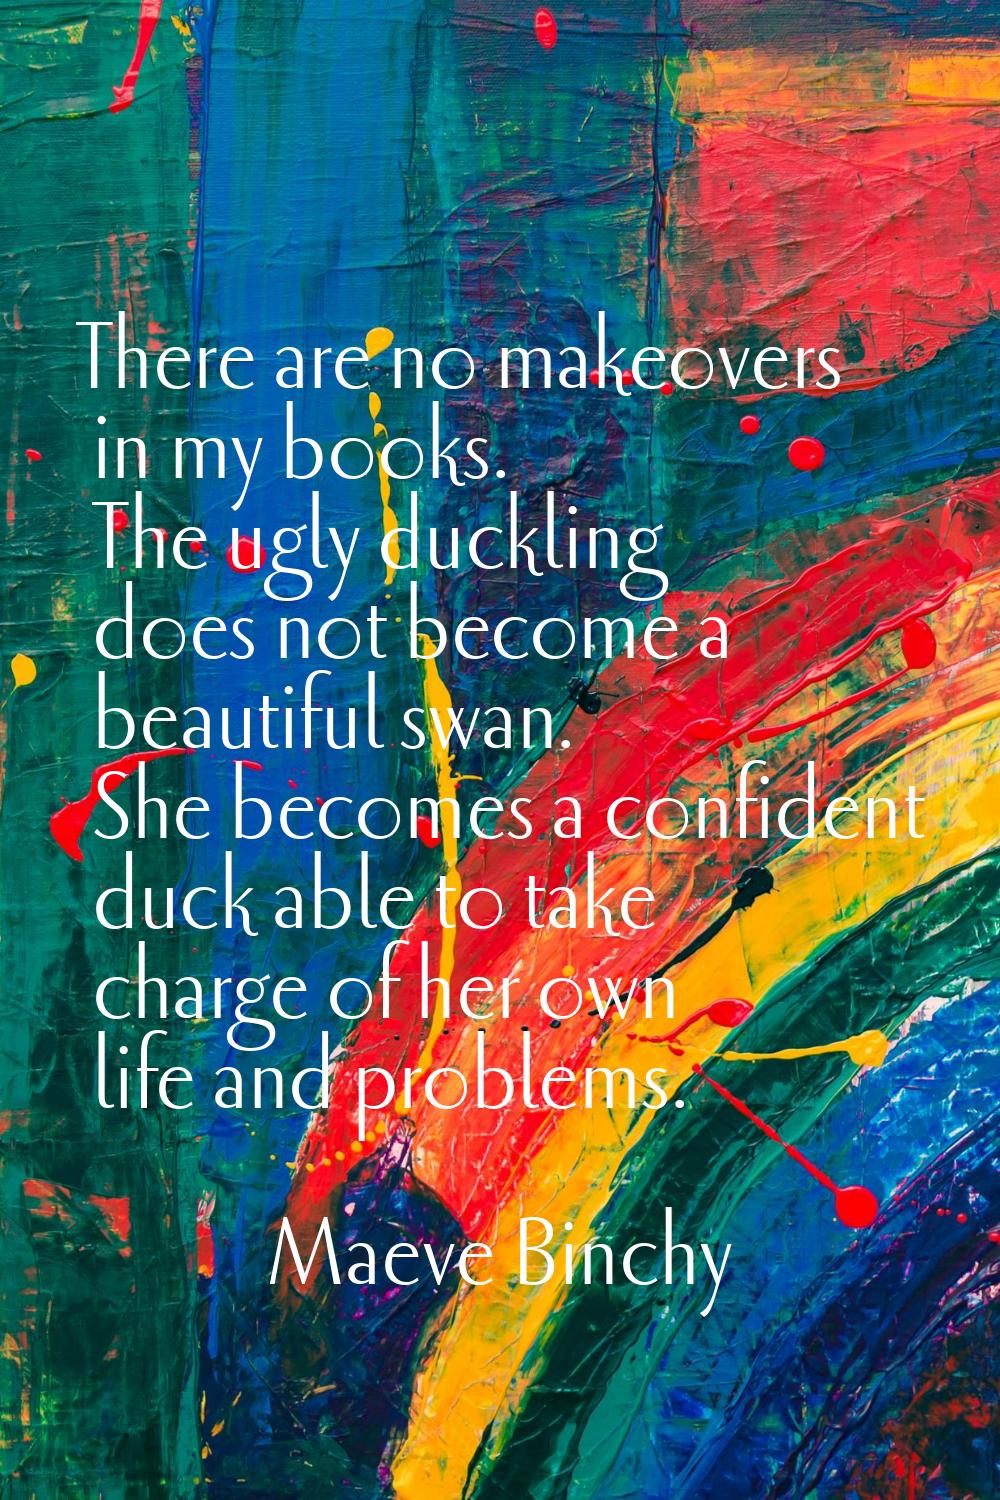 There are no makeovers in my books. The ugly duckling does not become a beautiful swan. She becomes